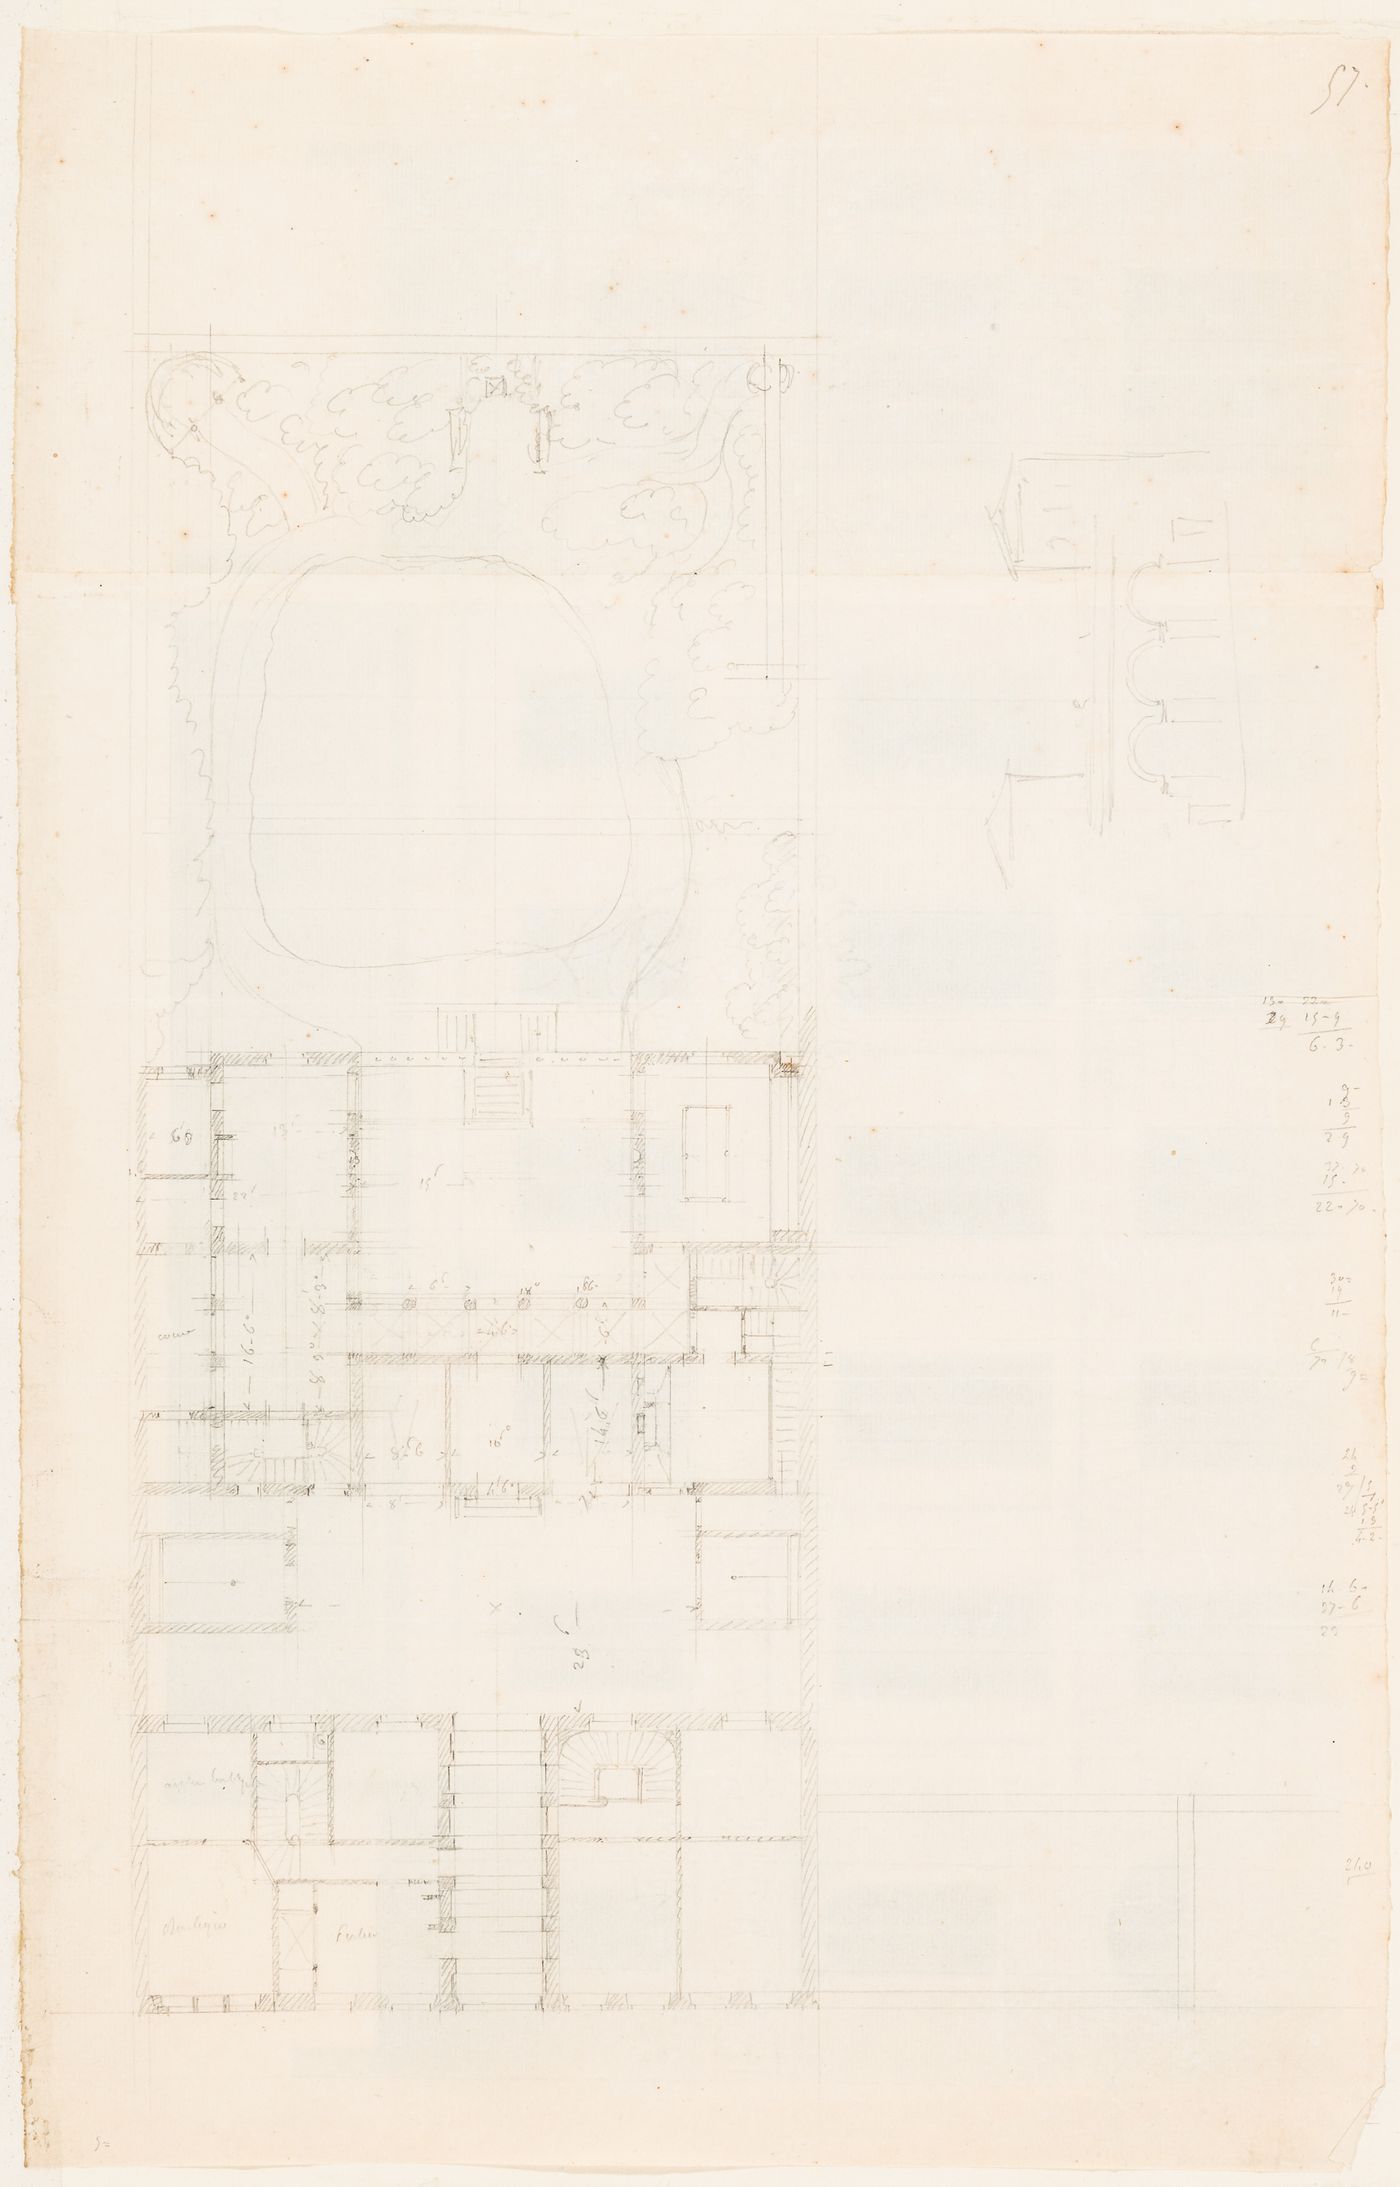 Rohault de Fleury House, 12-14 rue d'Aguesseau, Paris: Ground floor and garden plan and sketch elevation for the house